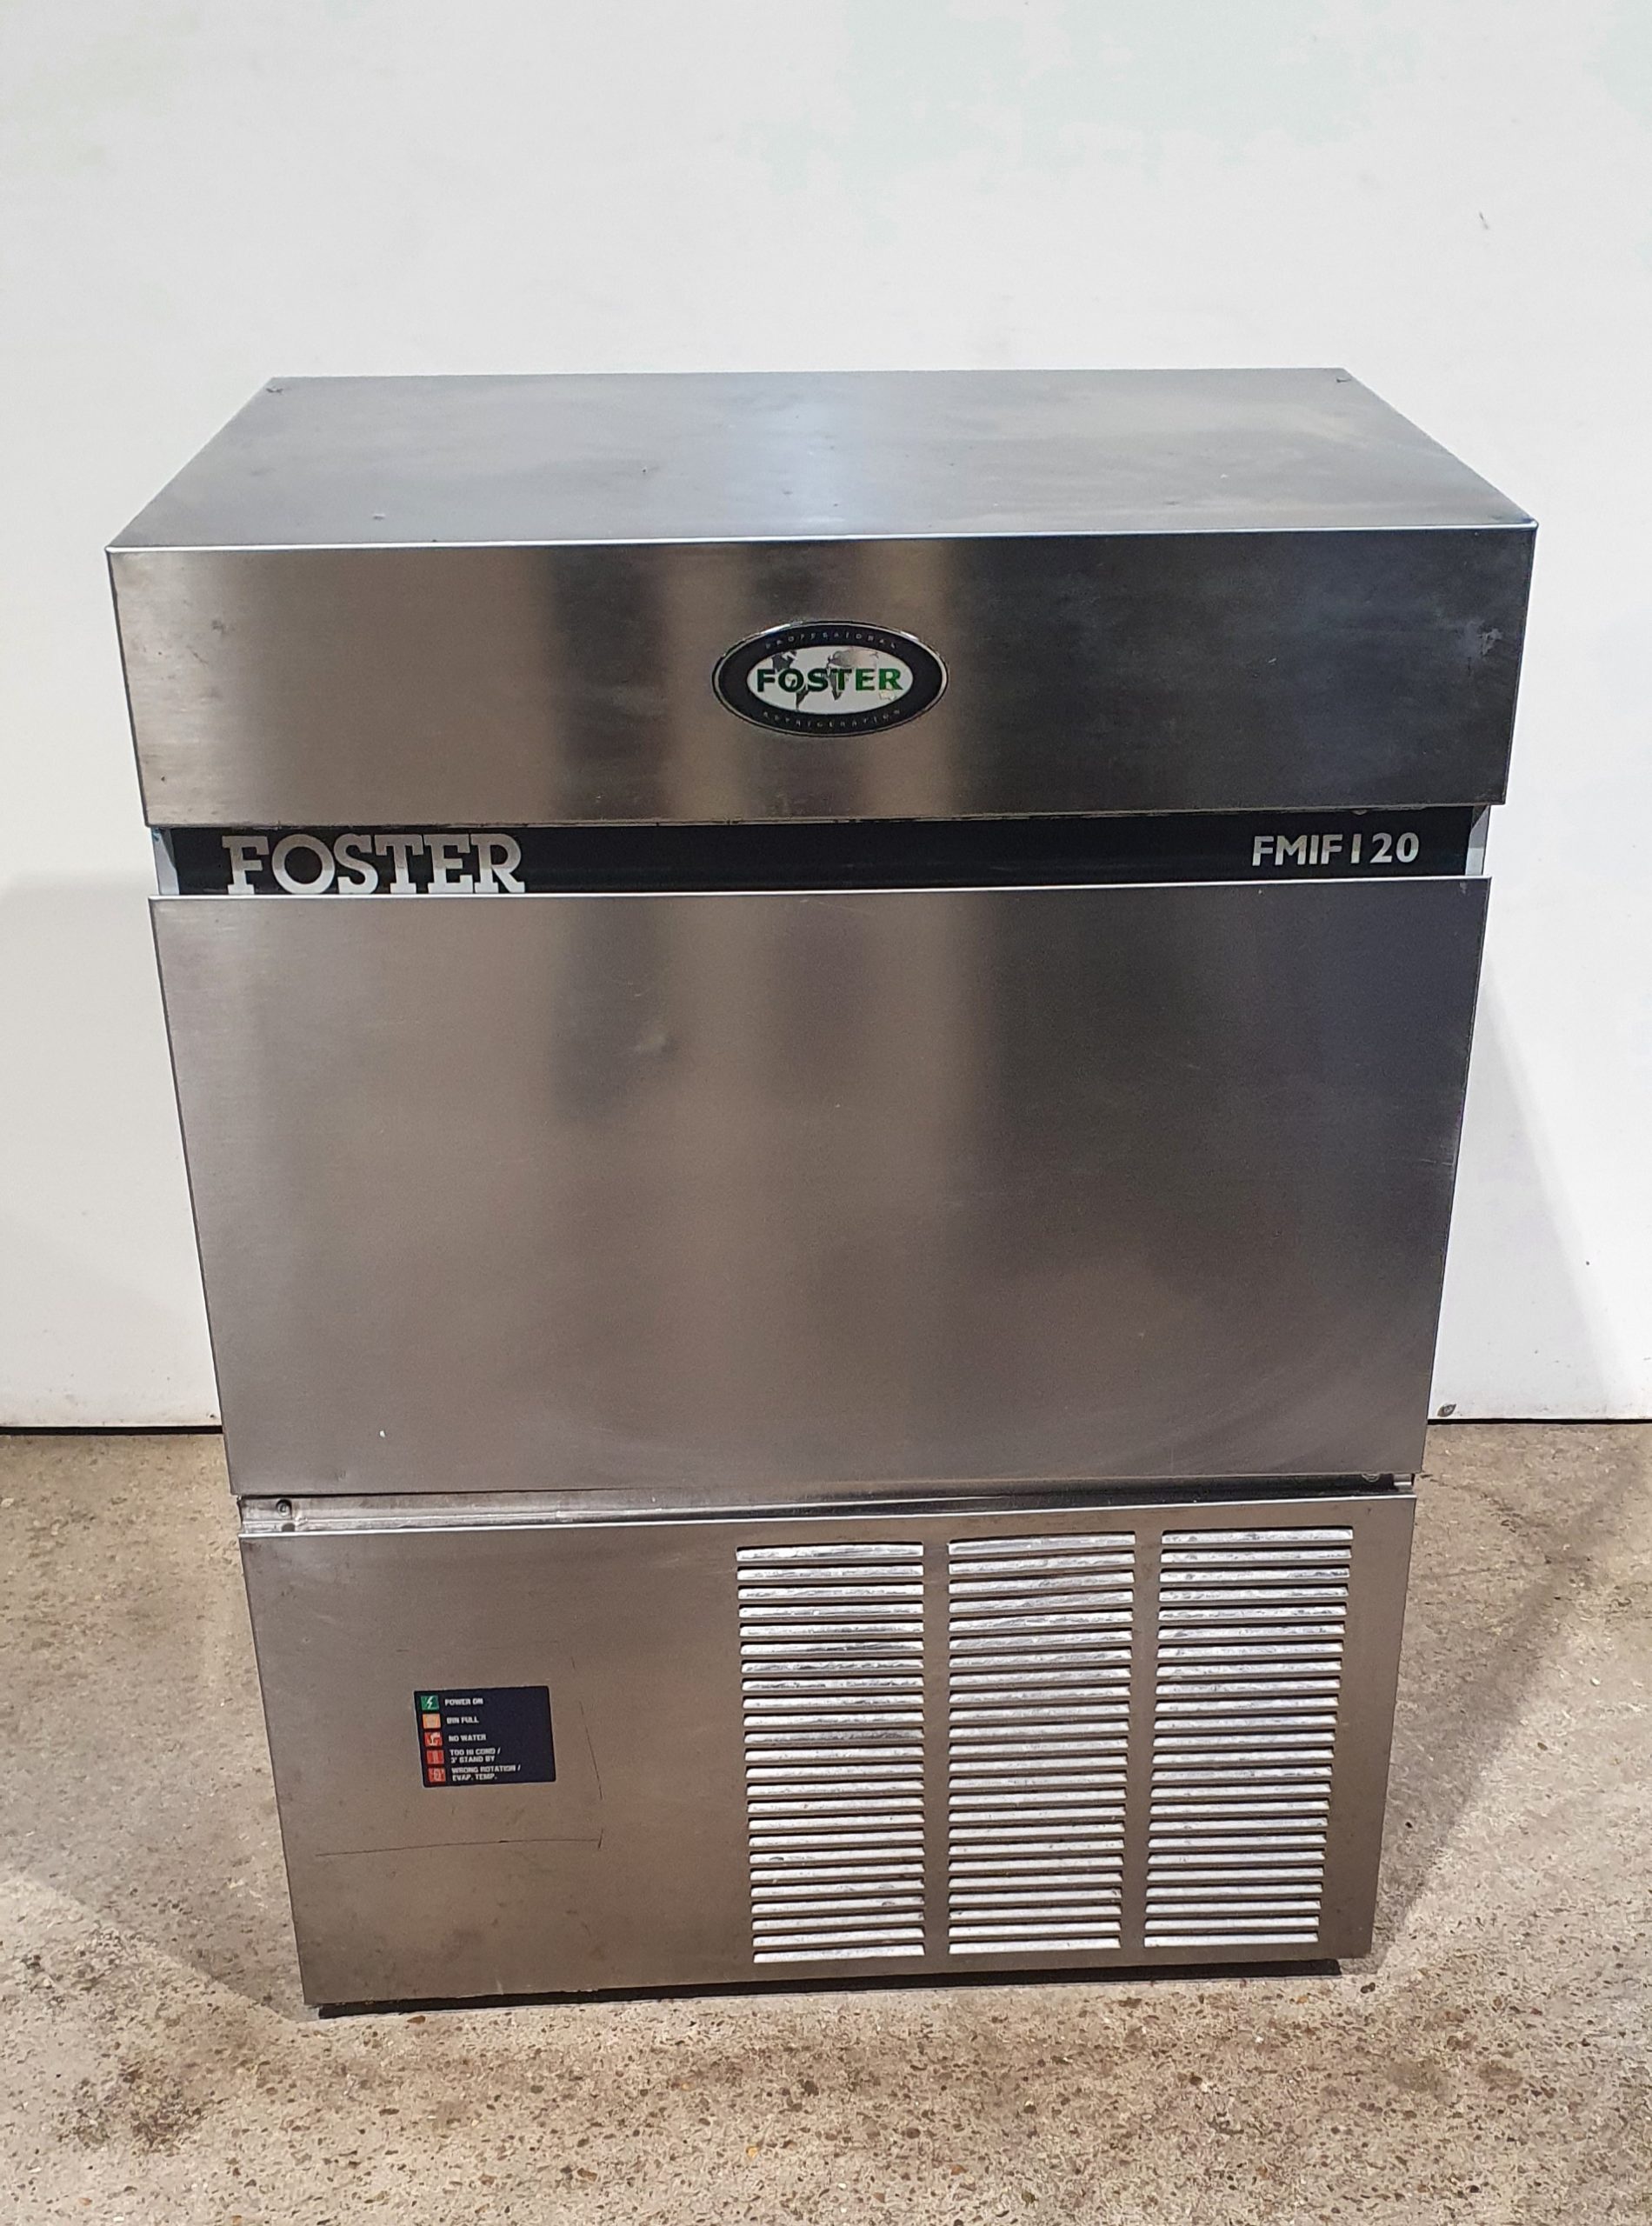 FOSTER FMIF 120 Ice Flaker